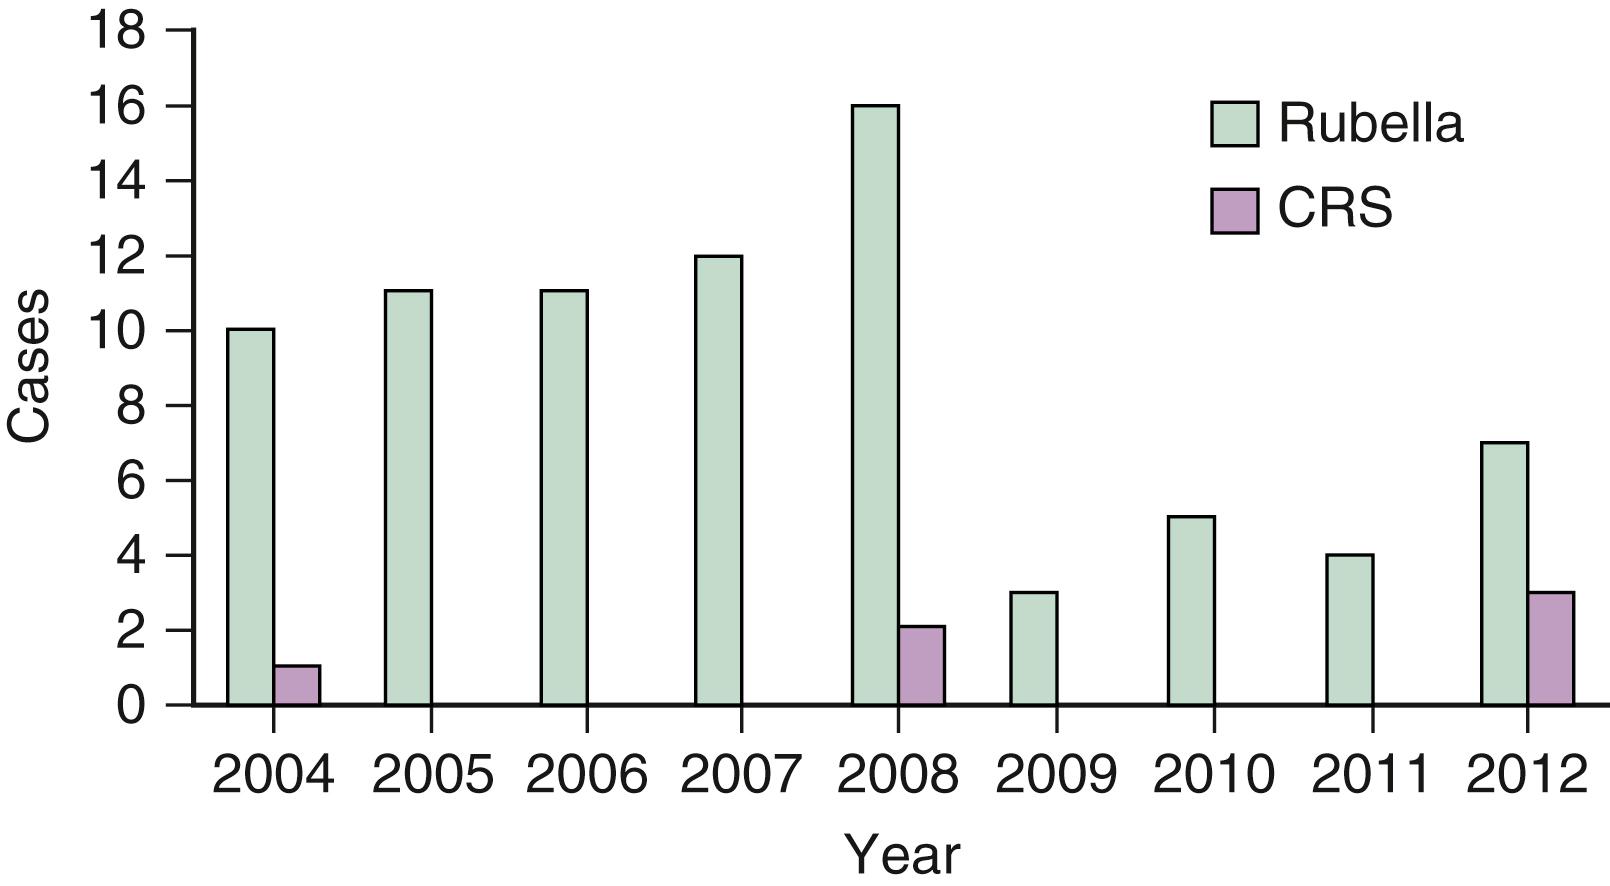 Fig. 221.3, Number of reported cases of rubella and congenital rubella syndrome (CRS) according to the National Notifiable Diseases Surveillance System, United States, 2004–2012.